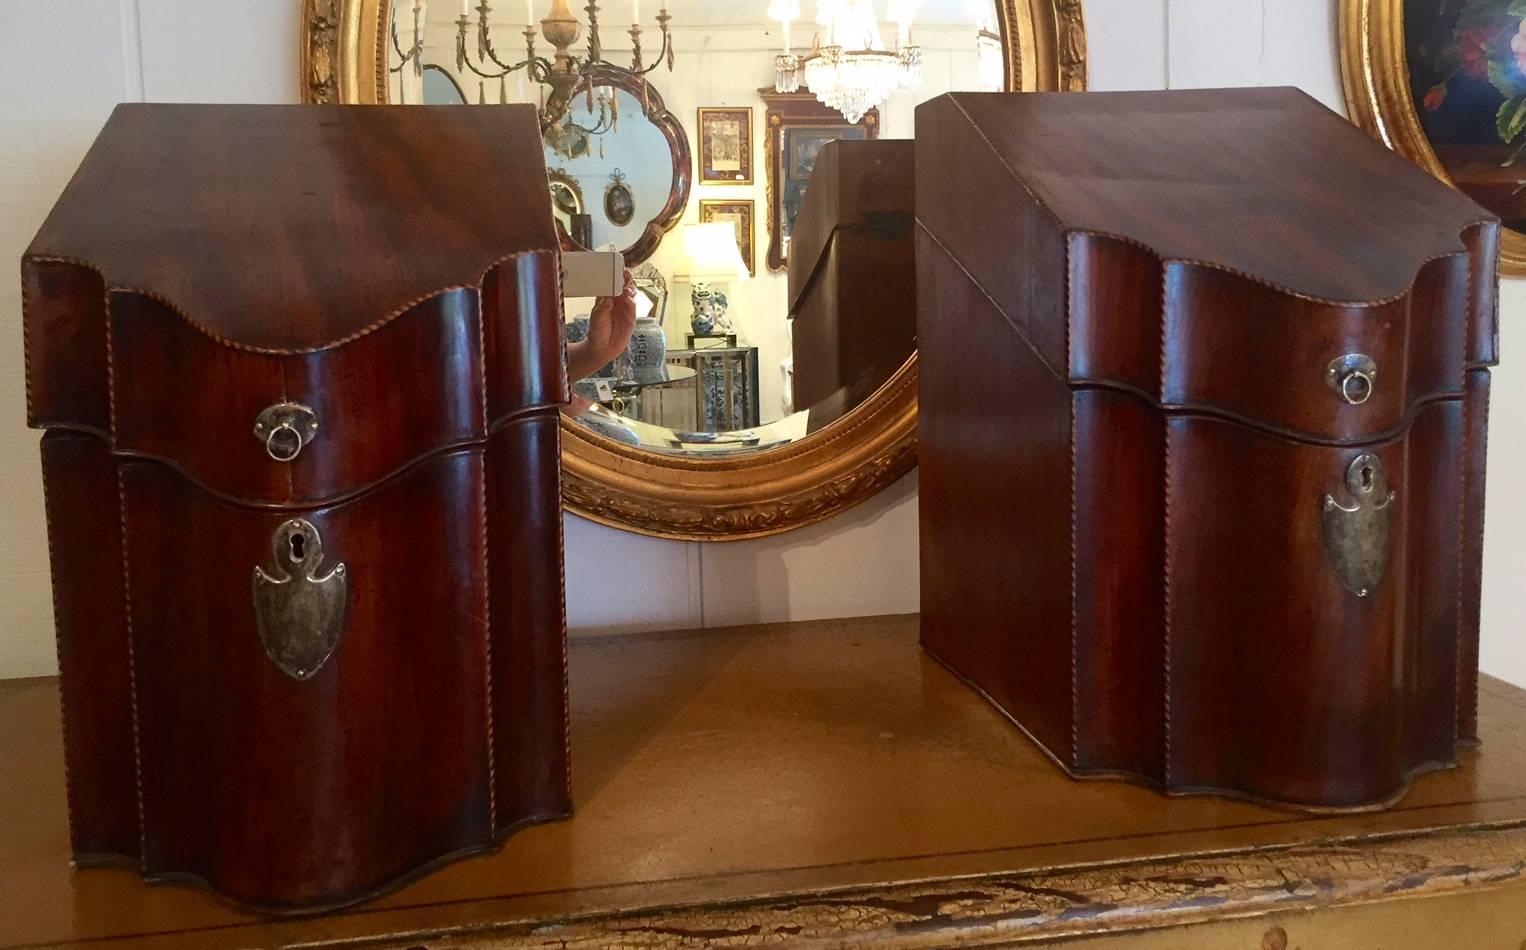 Two handsome matching George III mahogany cutlery boxes of typical form with a sloping lid, particularly bold serpentine front and original brass escutcheon and ring-handle.  The interiors do not have felt dividers to organize silverware, but are